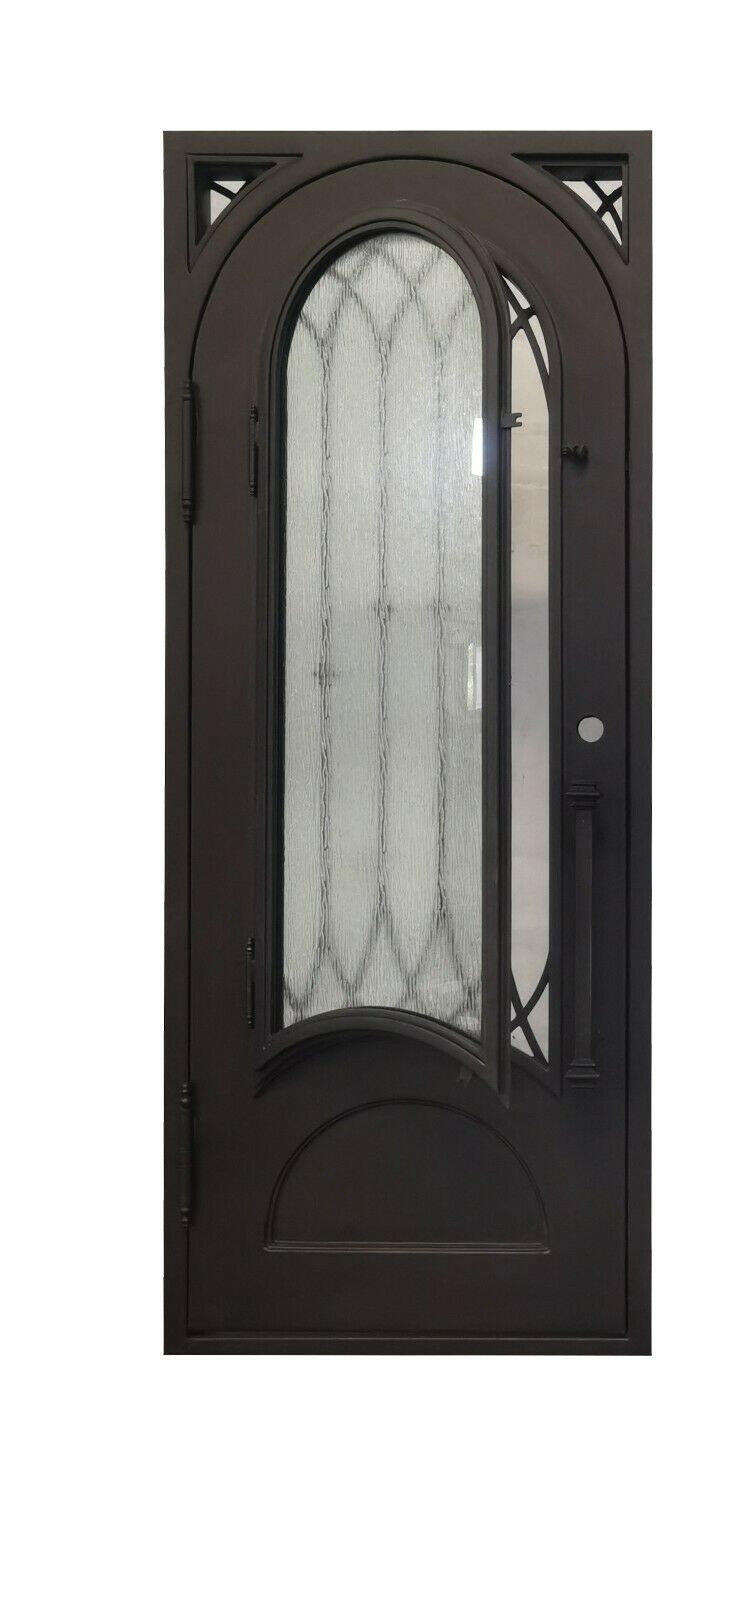 Austin Model Pre Hung Single Front Entry Wrought Iron Door With Rain Glass